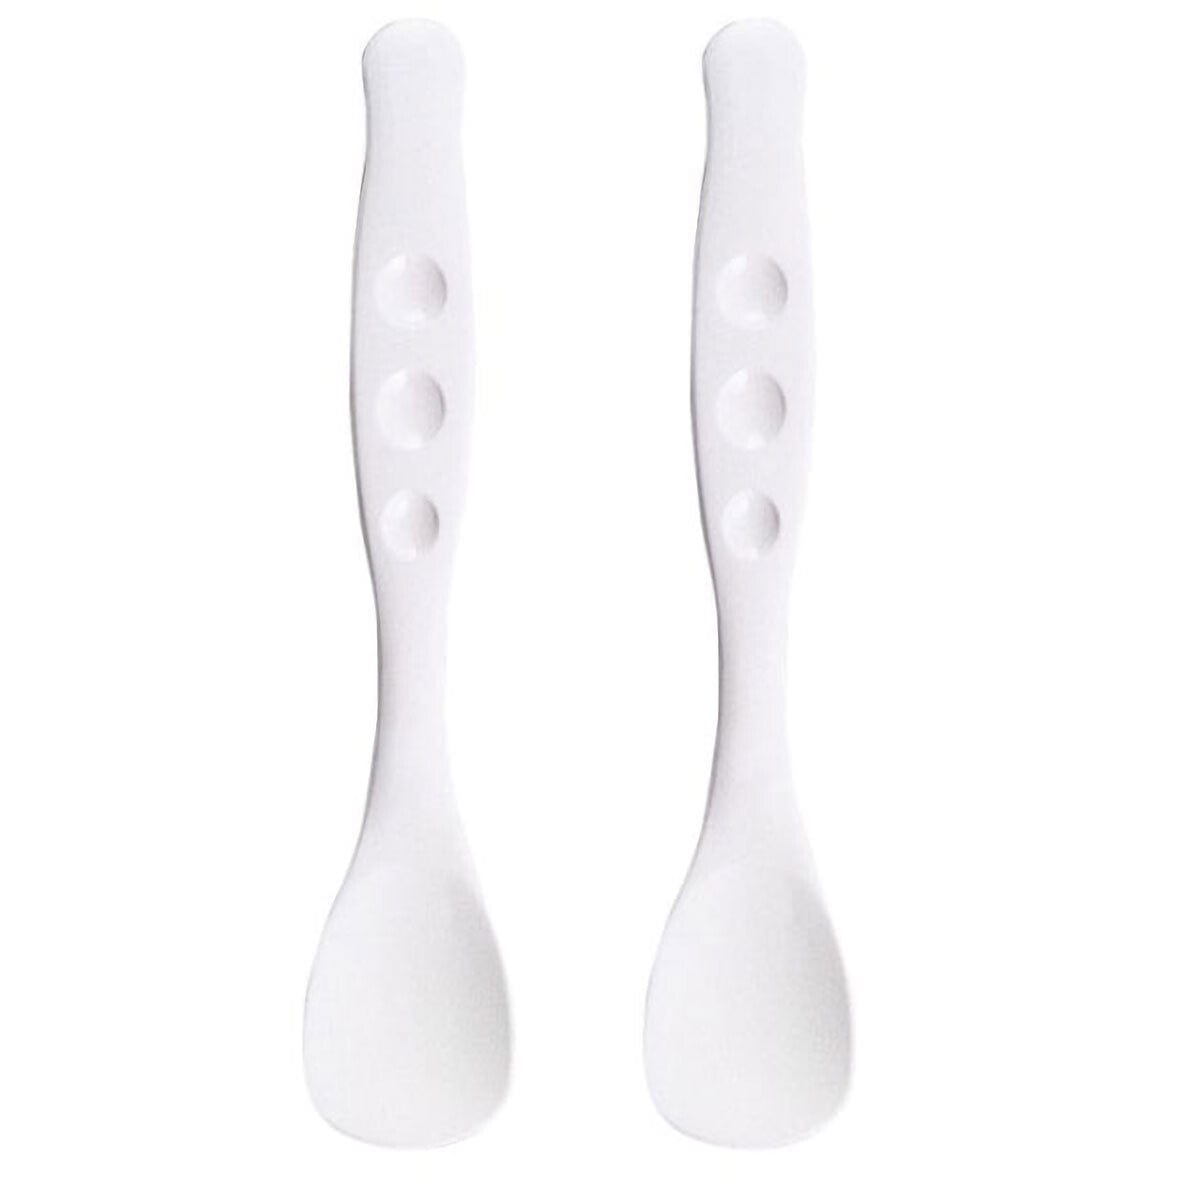 Richell - You Can Use It Baby Soft Spoon 2 Pieces CherryAffairs